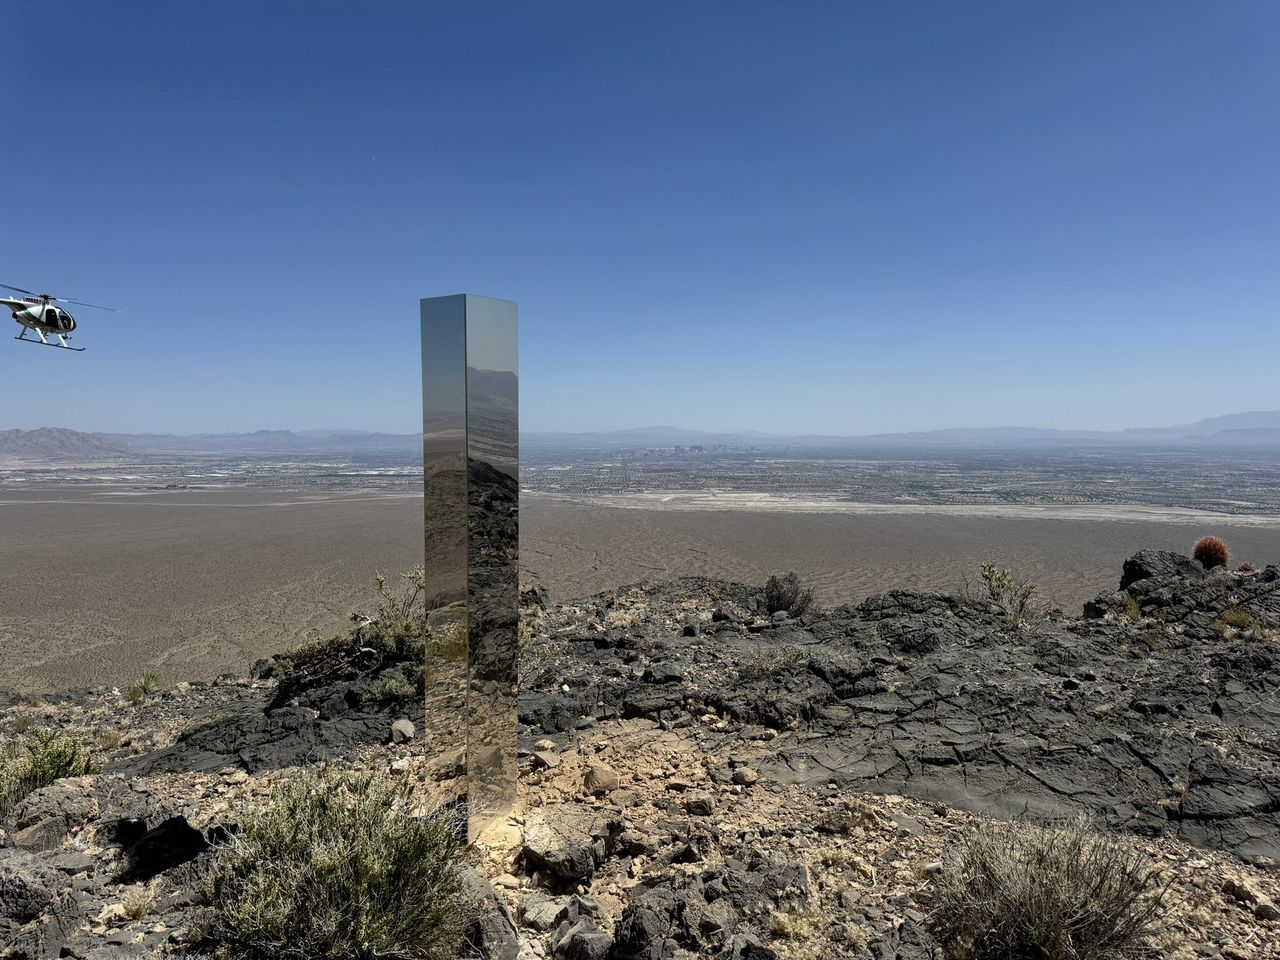 A mysterious monolith has appeared in the desert in the USA. Where did it come from and what does it mean?